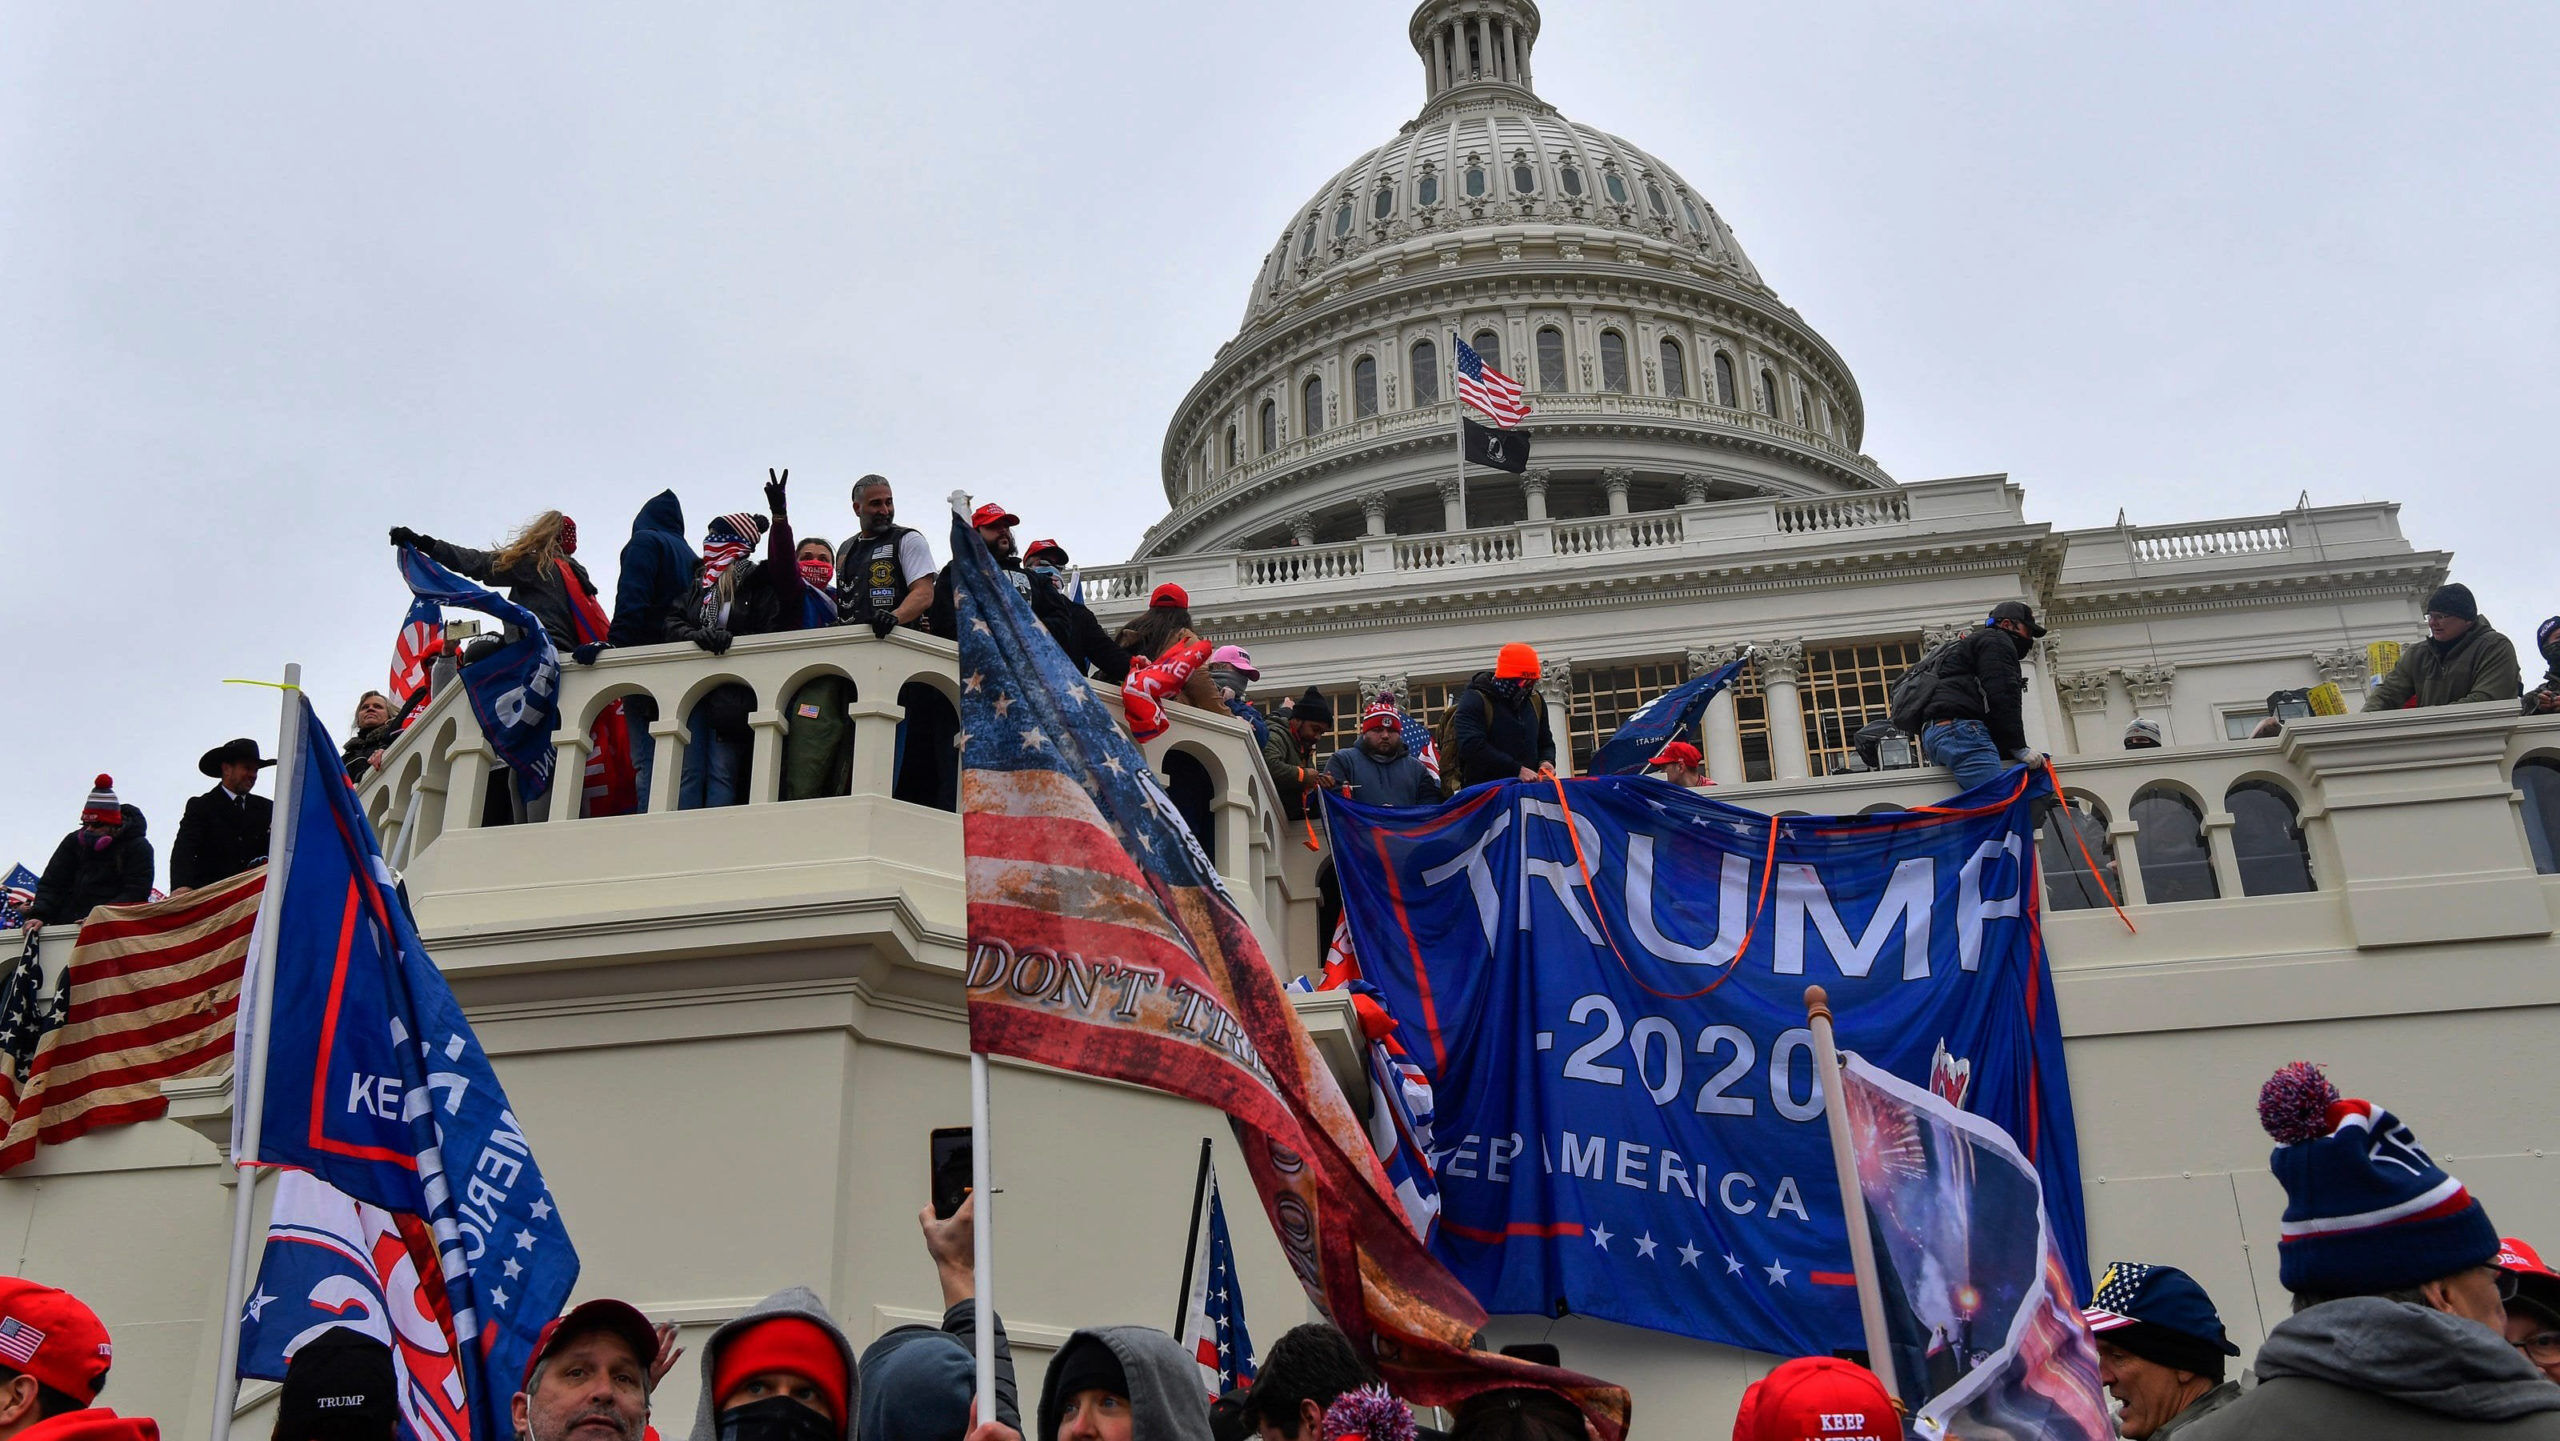 Trump supporters staging a takeover of the U.S. Capitol